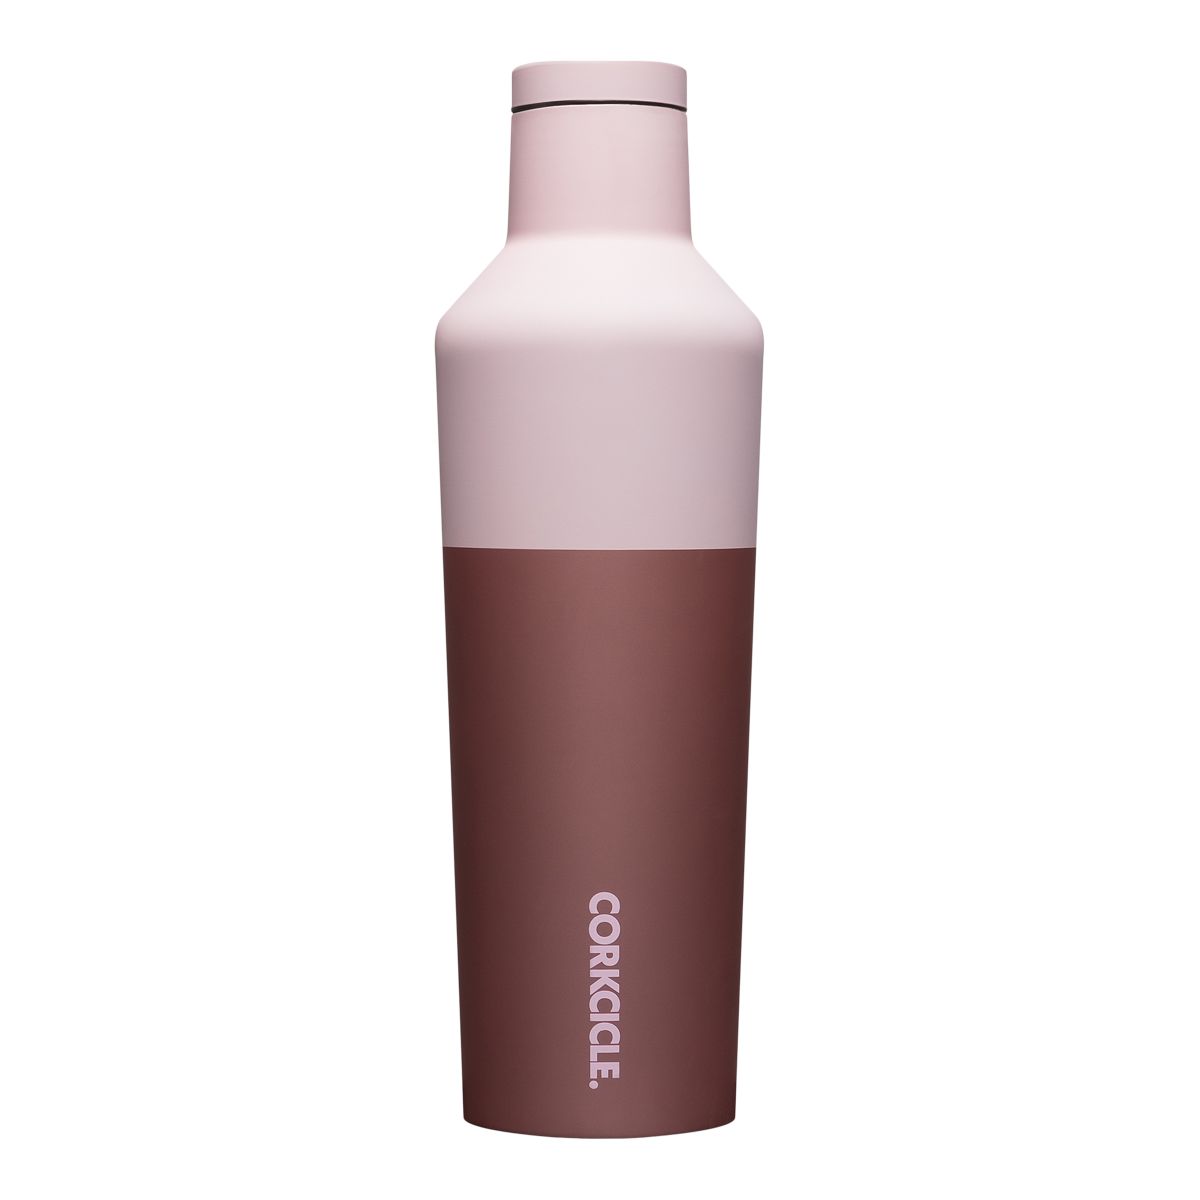 Corkcicle Canteen 16 oz Water Bottle , Screw Cap, Insulated